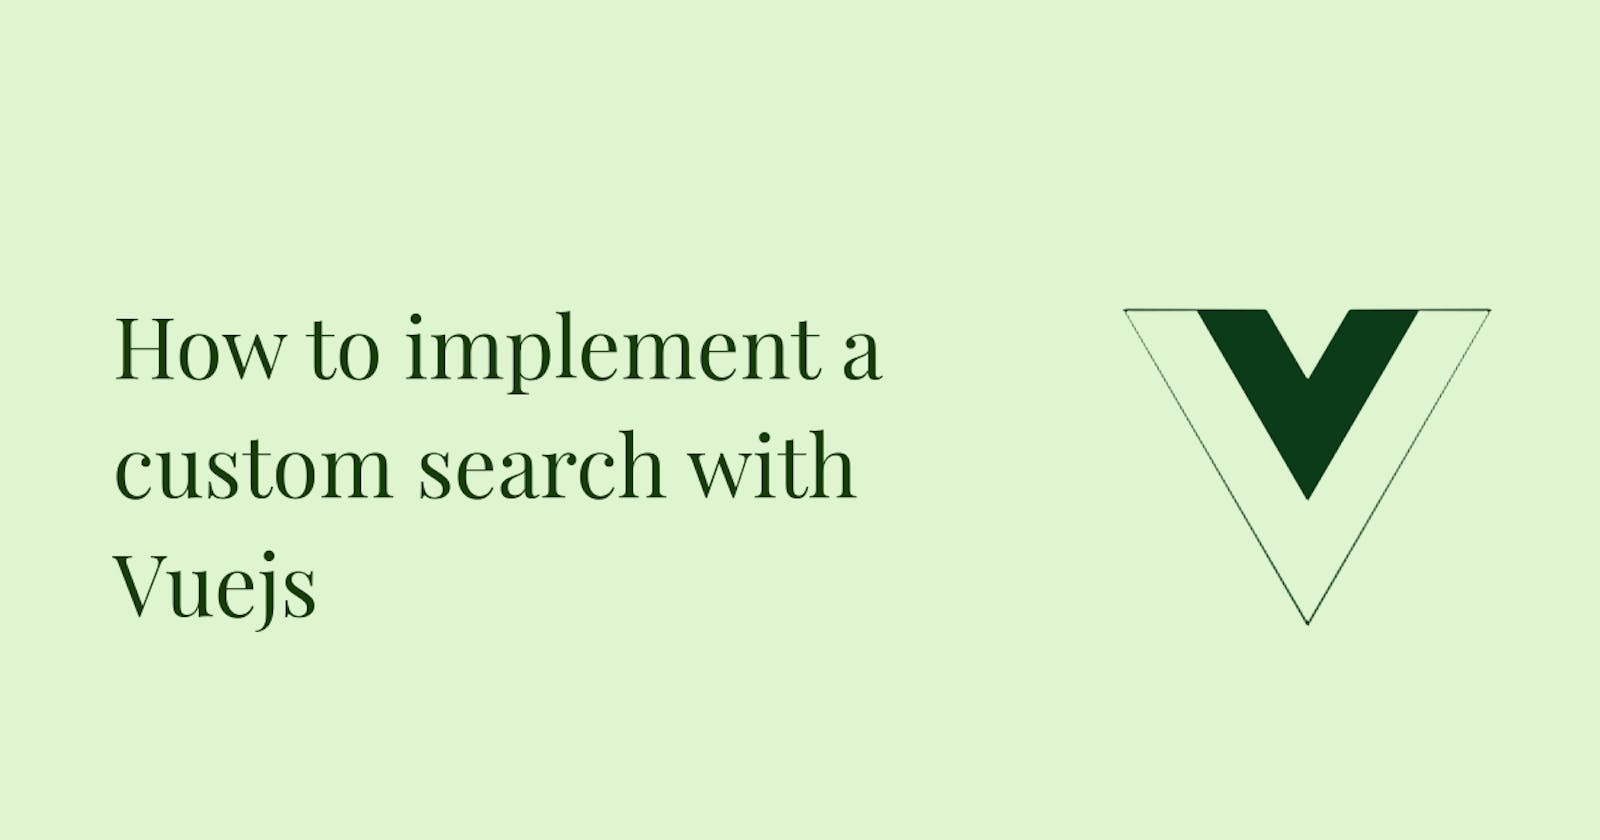 How to implement a custom search with Vuejs